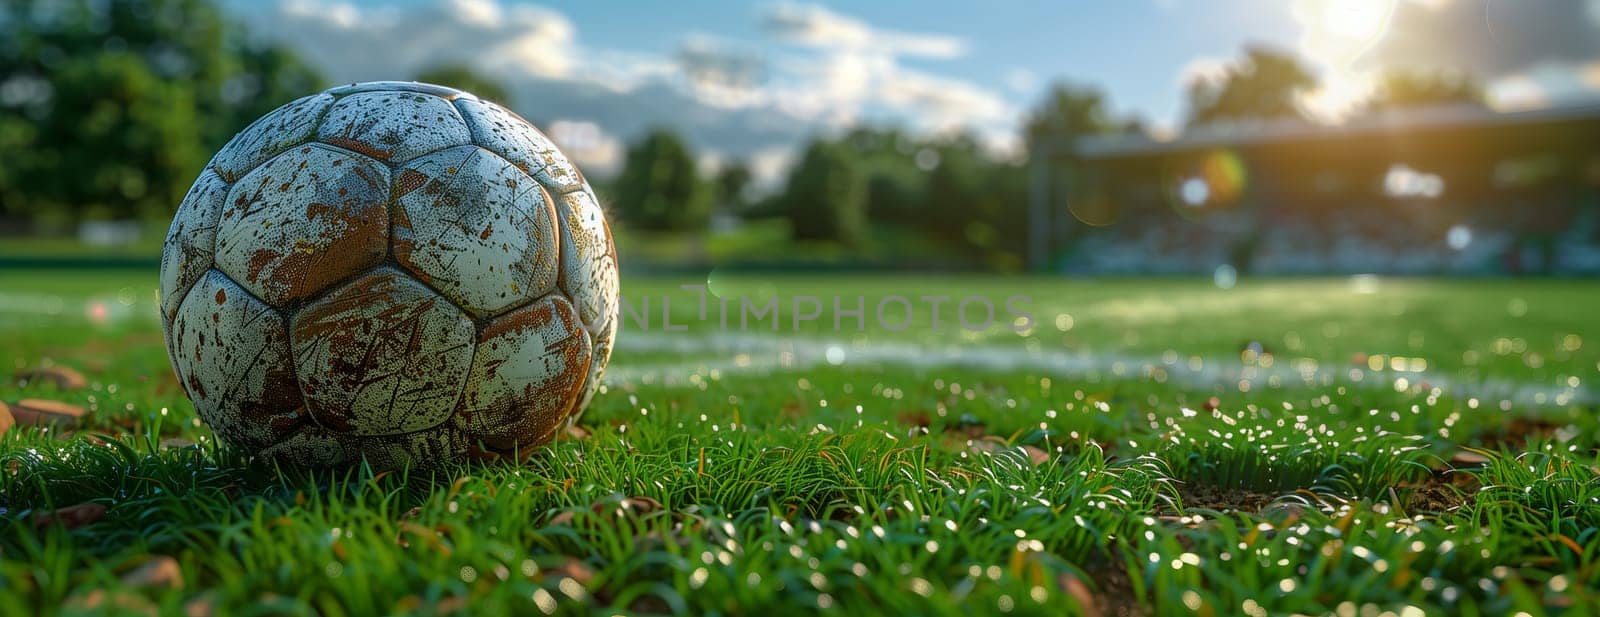 A soccer ball rests on a grassy field, surrounded by lush greenery. The natural landscape includes clouds in the sky, making it ideal for sports activities